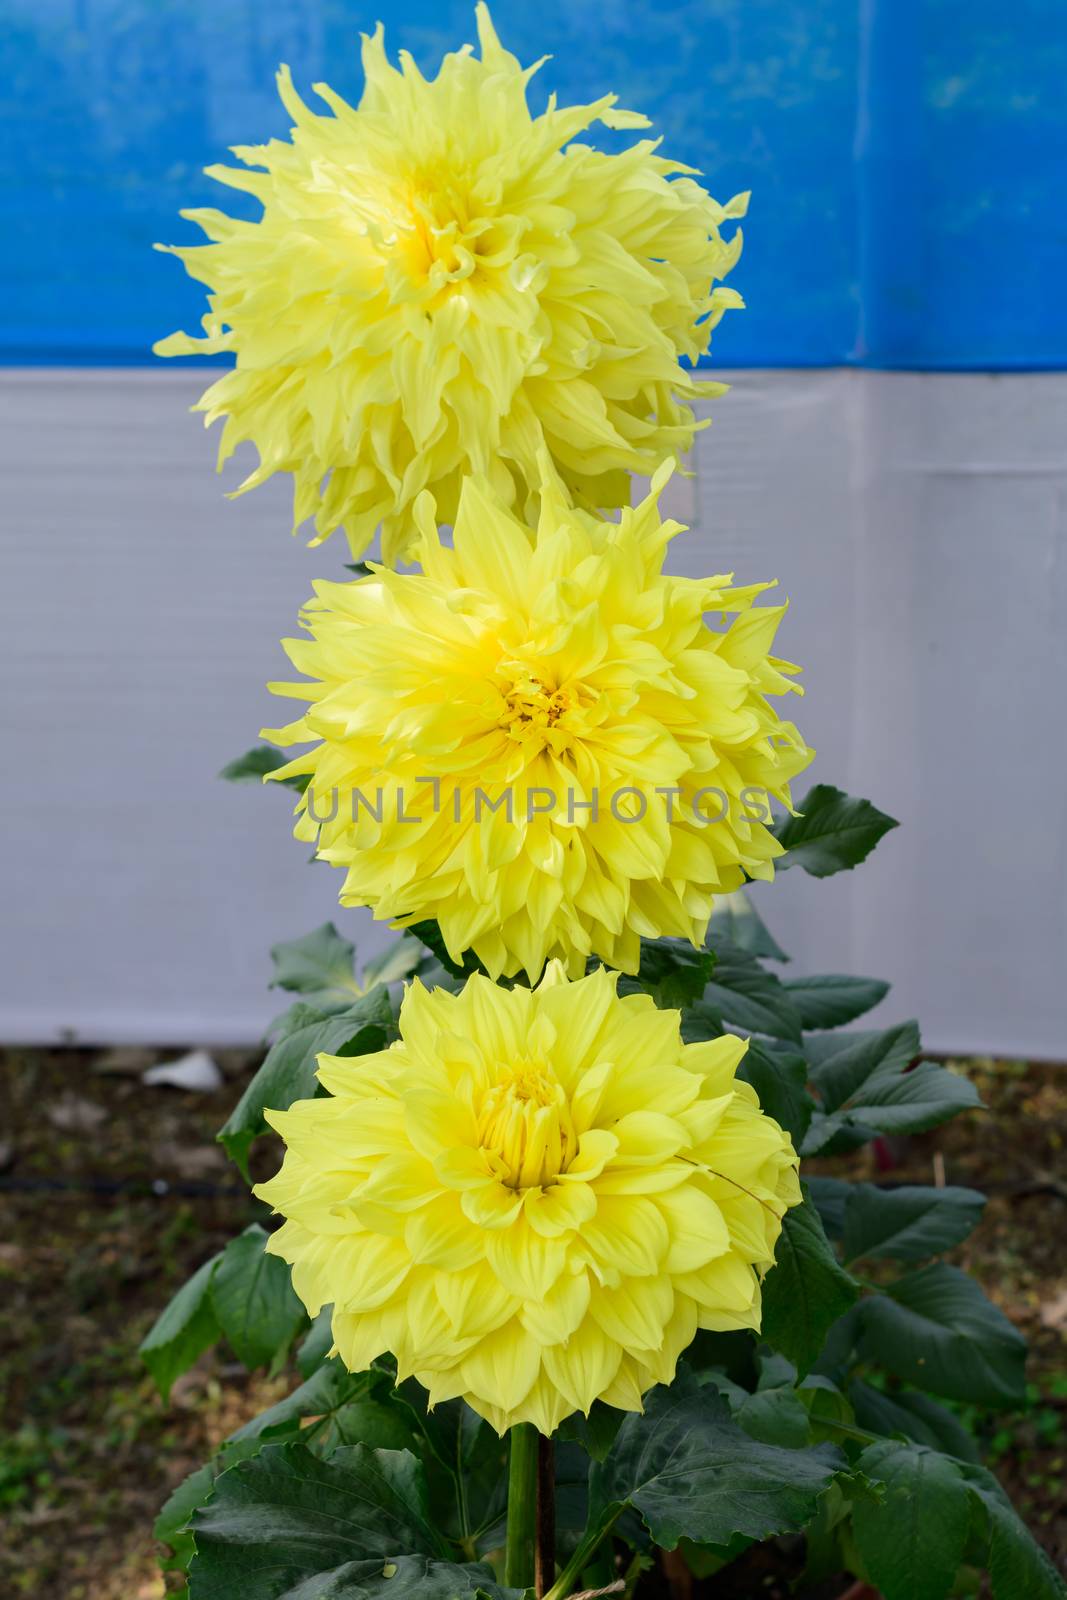 Yellow Guldavari Flower plant, a herbaceous perennial plants. It is a sun loving plant Blooms in early spring to late summer. A very popular flower for gardens and bouquets. Copy space room for text. by sudiptabhowmick